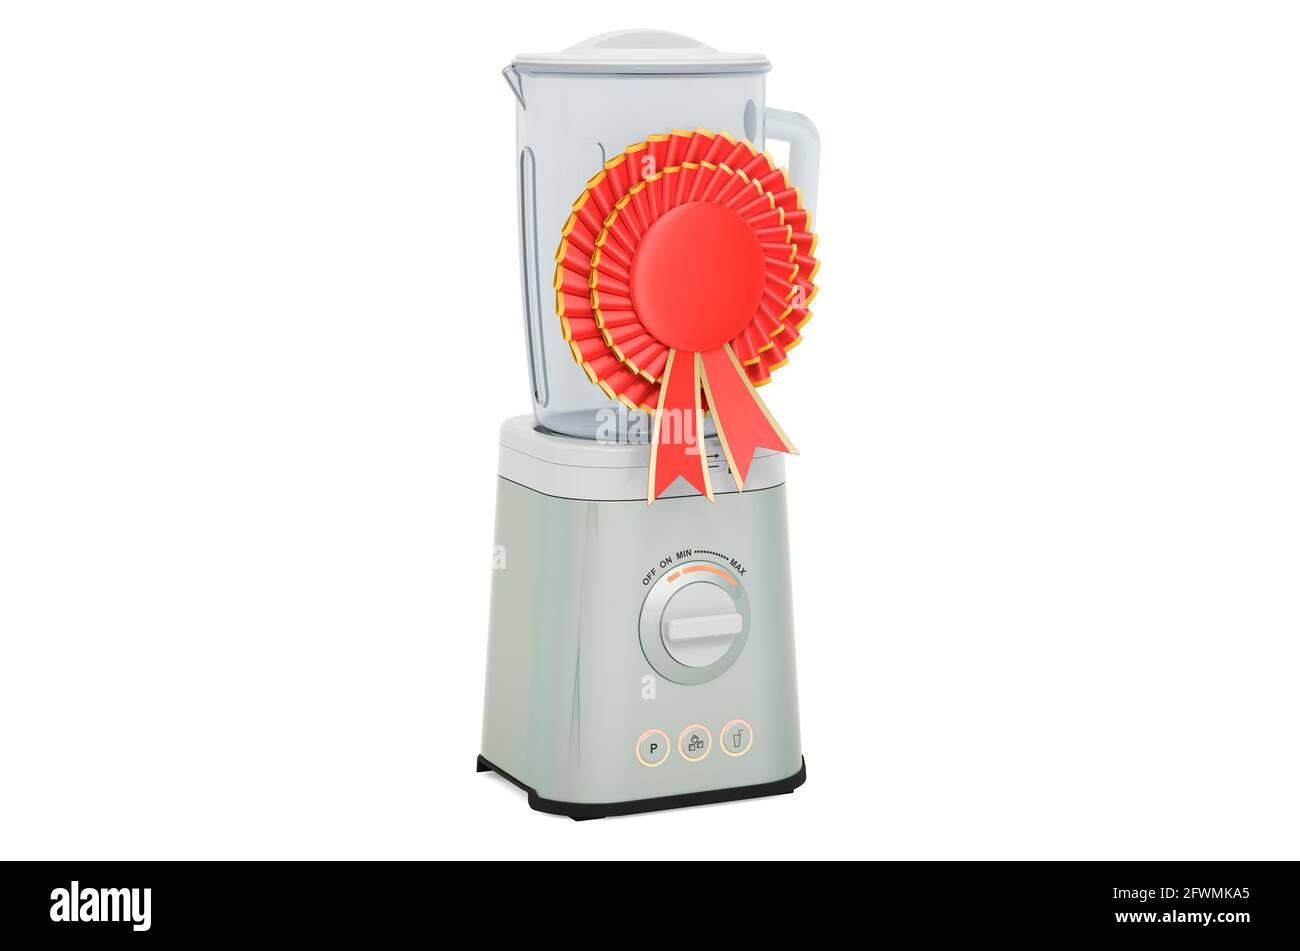 https://c8.alamy.com/comp/2FWMKA5/electric-blender-with-best-choice-badge-3d-rendering-isolated-on-white-background-2FWMKA5.jpg